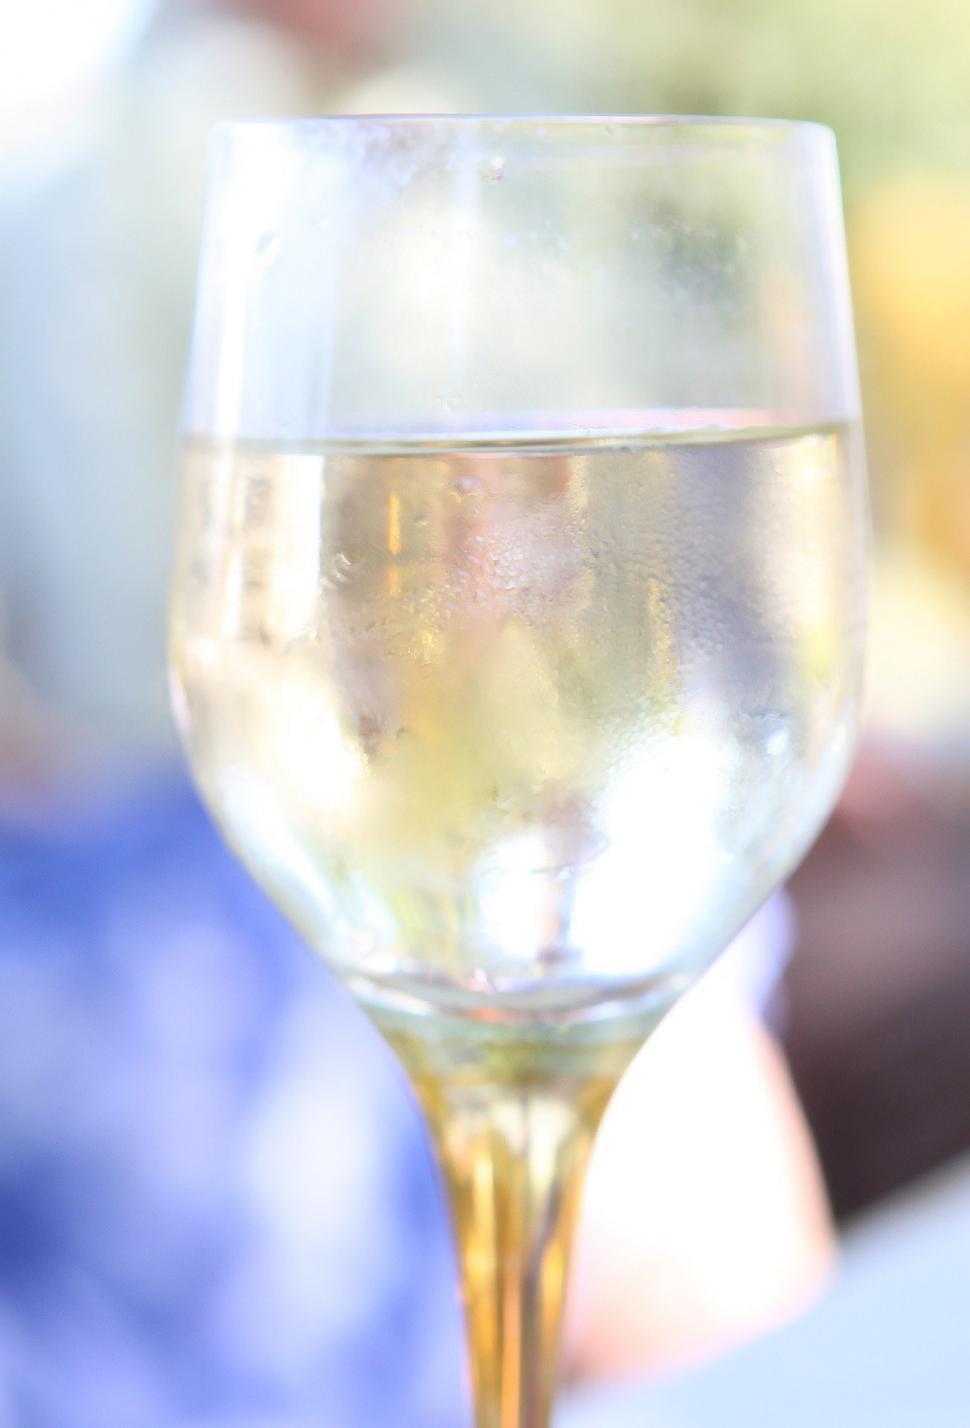 Free Image of Close-Up of a Wine Glass on a Table 